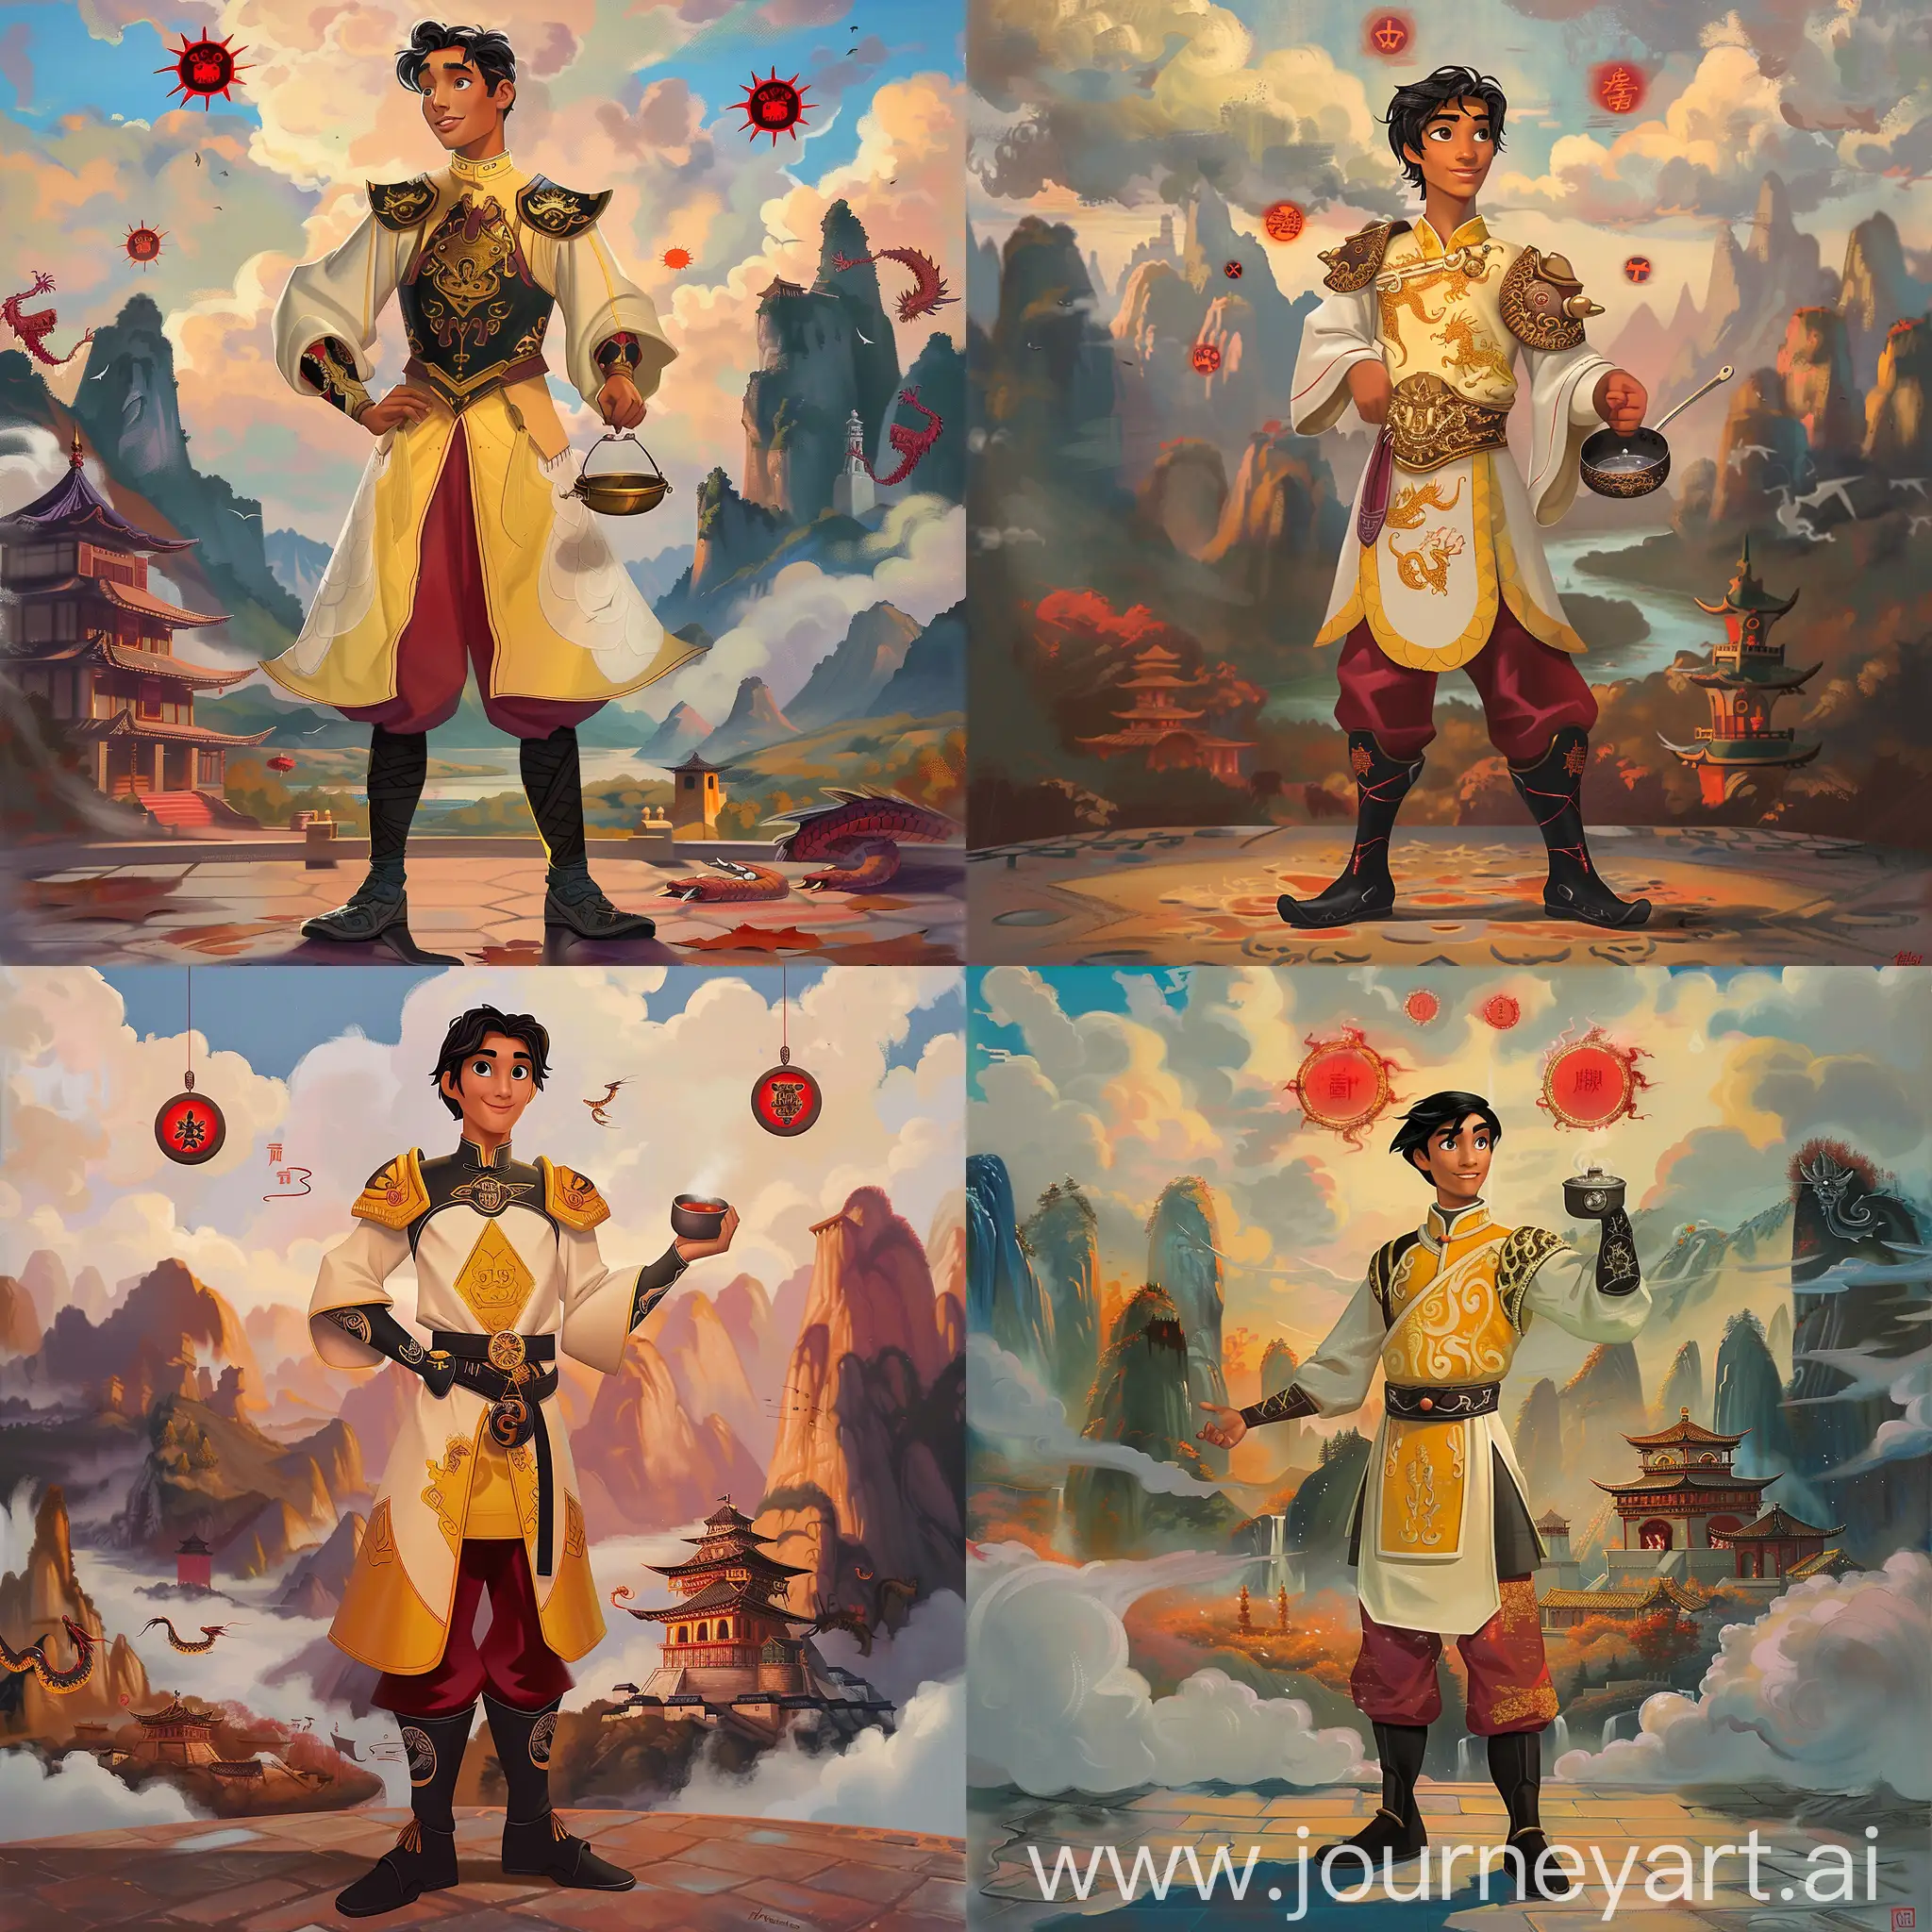 Historic painting style:

a Disney Spanish guy Armando, he is about 30 years old and a bit chubby,  from Elena of Avalor cartoon, he has black short hair, he wears deep yellow and white color Chinese medieval taoist monk monk robe with some armor and taichi emblems, with deep red pant and black boots, he holds a small Chinese saucepan in right hand,

Chinese Guilin mountains and temple as background,  evil iced dragons and three small red blood suns in cloudy sky.